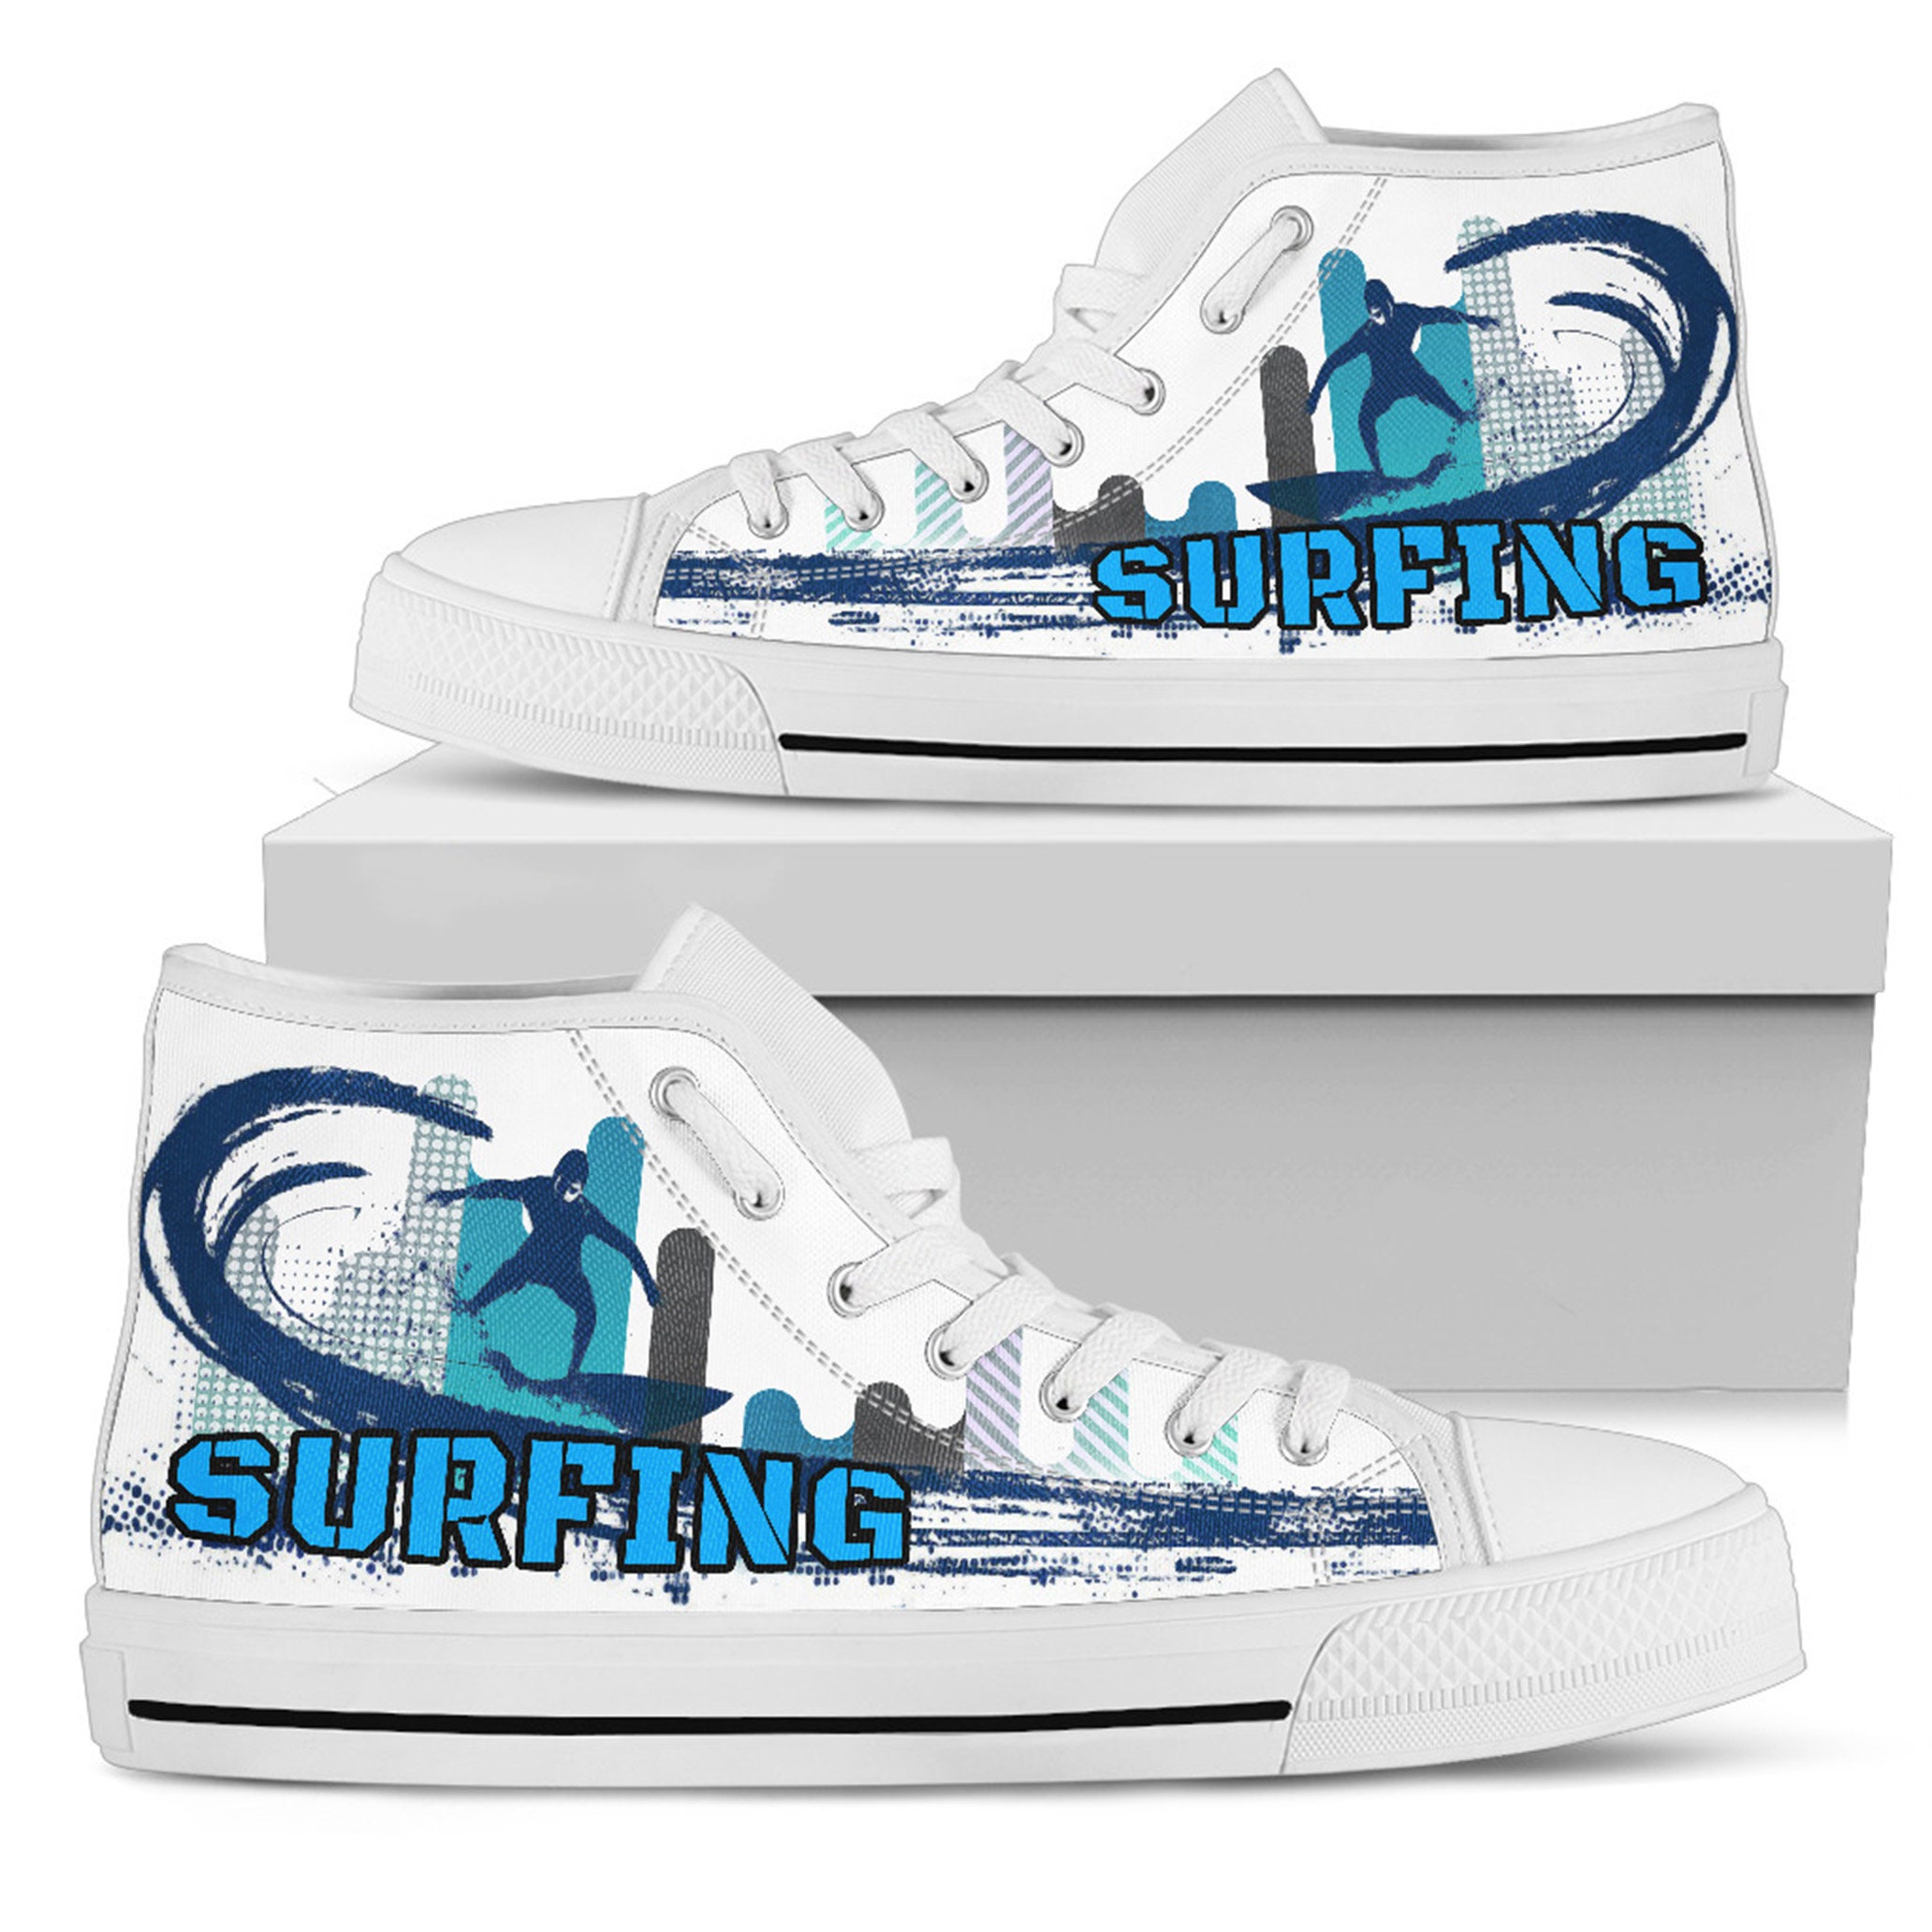 Surfing High Top Sneakers